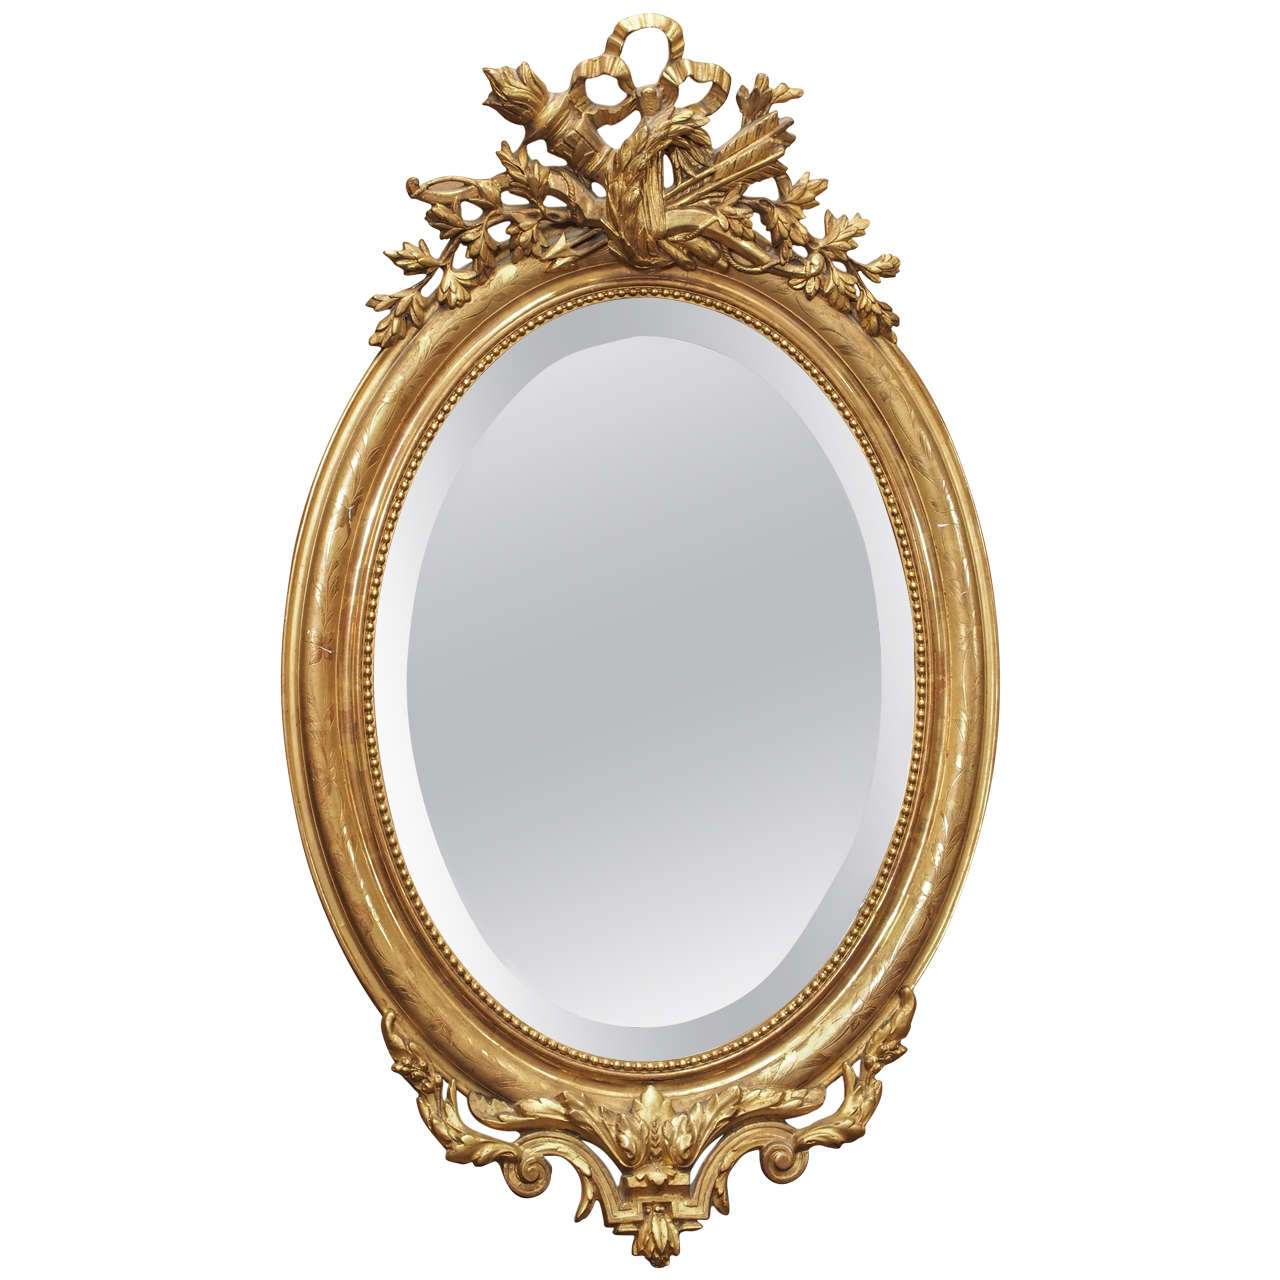 Lovely Oval Antique French Gold Beveled MIrror circa 1850